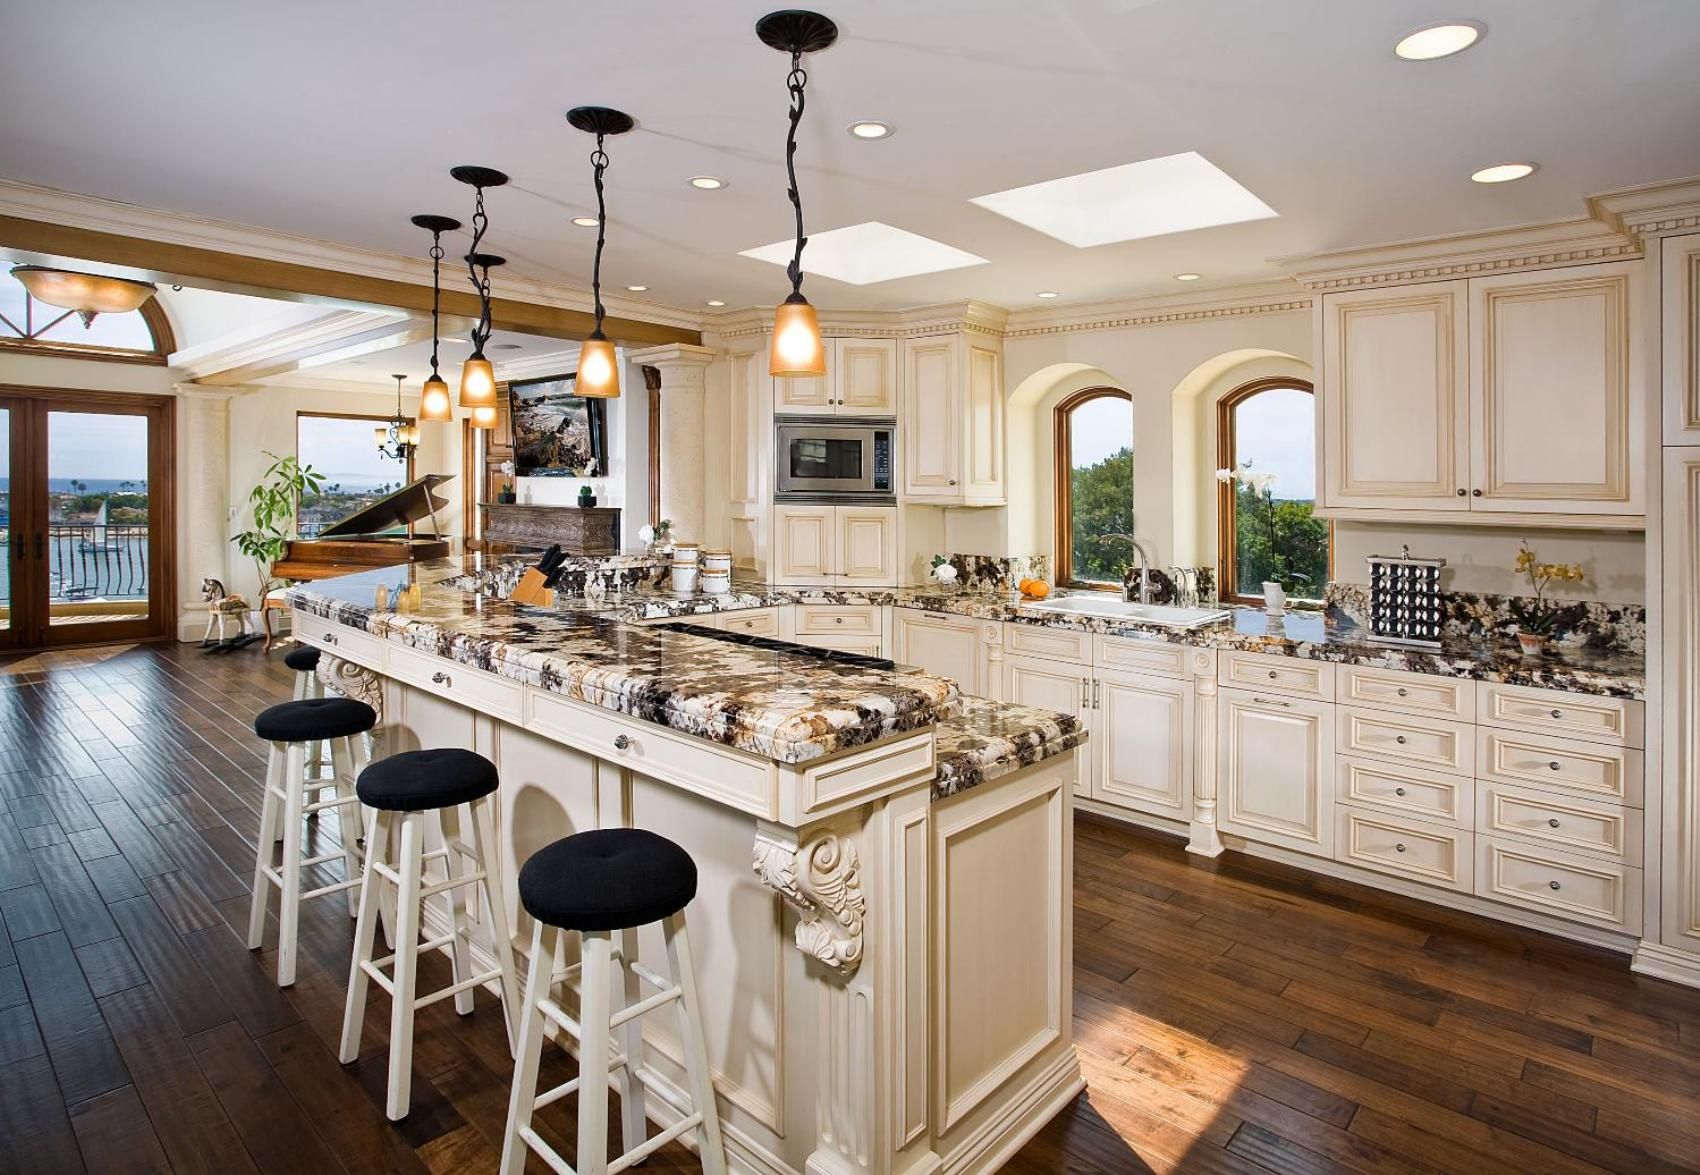 Cabinet Refinishing As The Best Way For Kitchen Upgrade